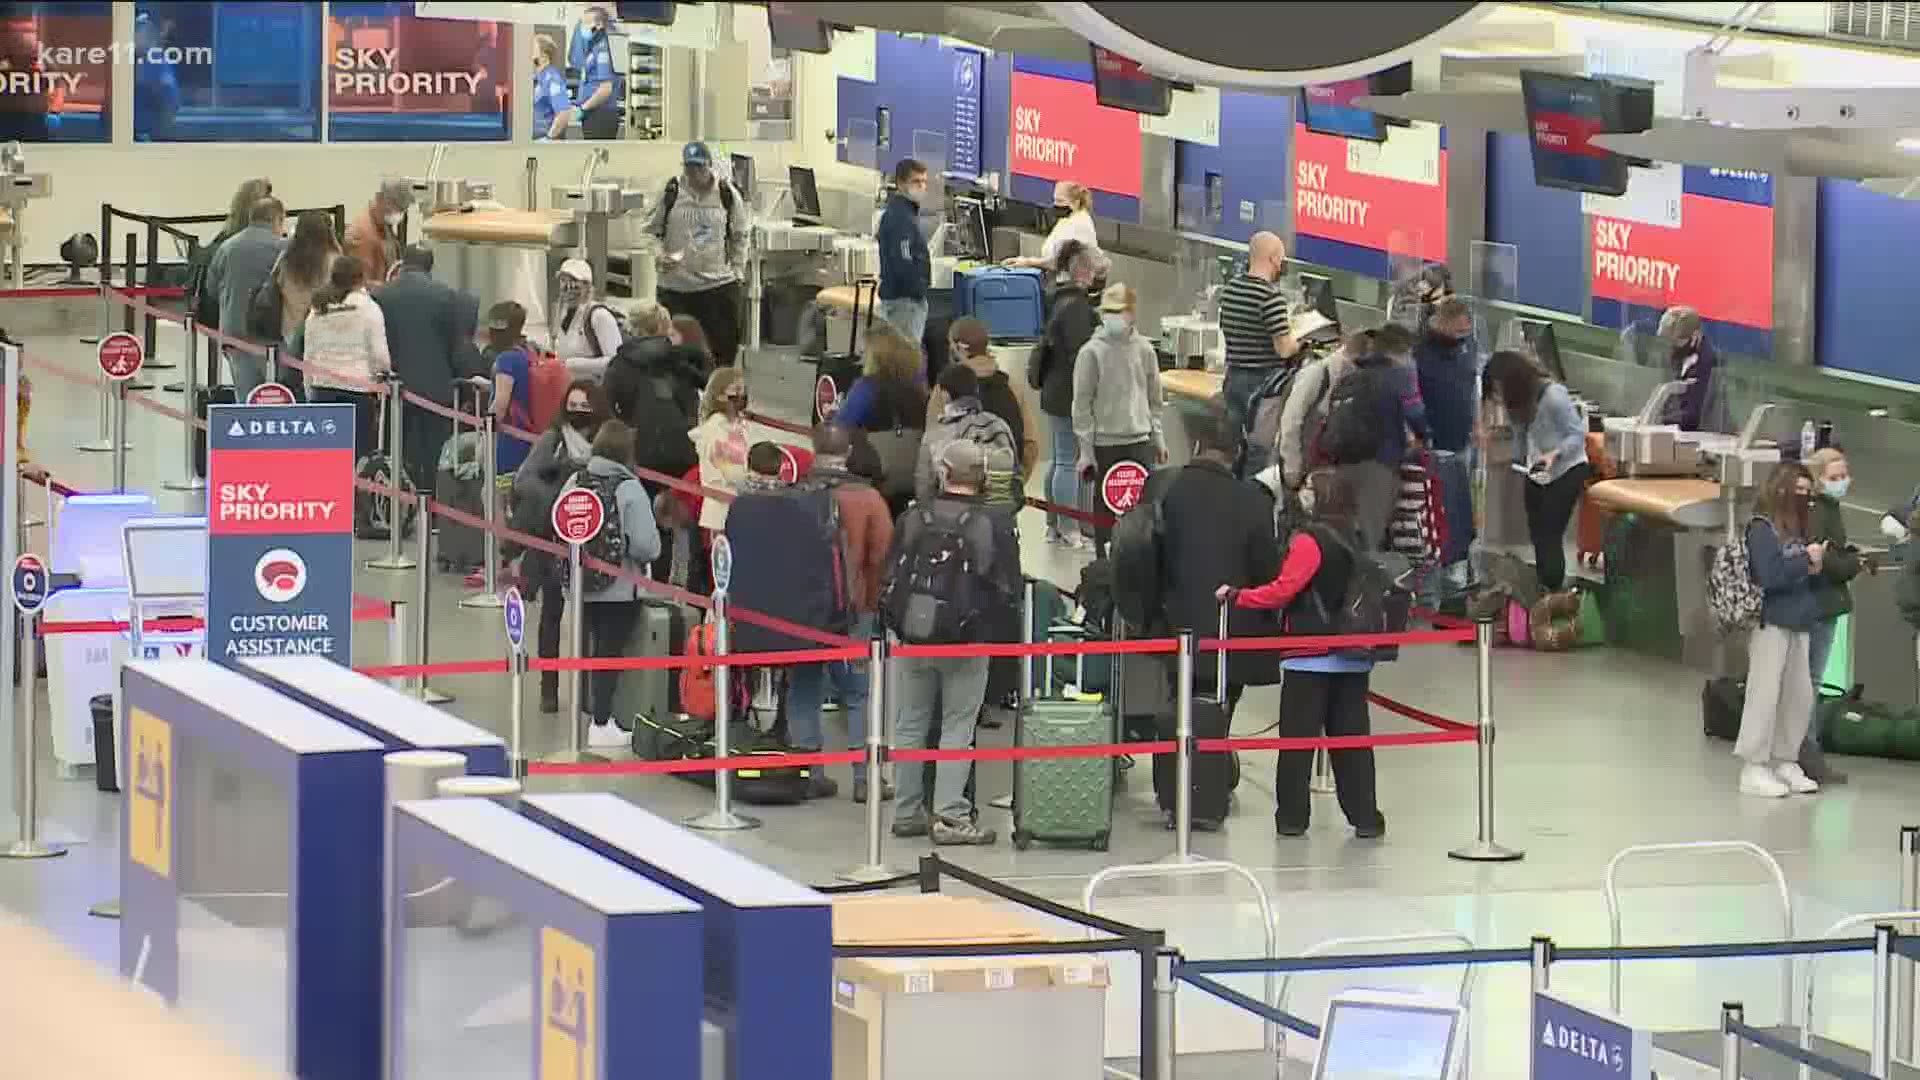 According to TSA, Saturday marks the 10th straight day where more than one million people passed through airport security.